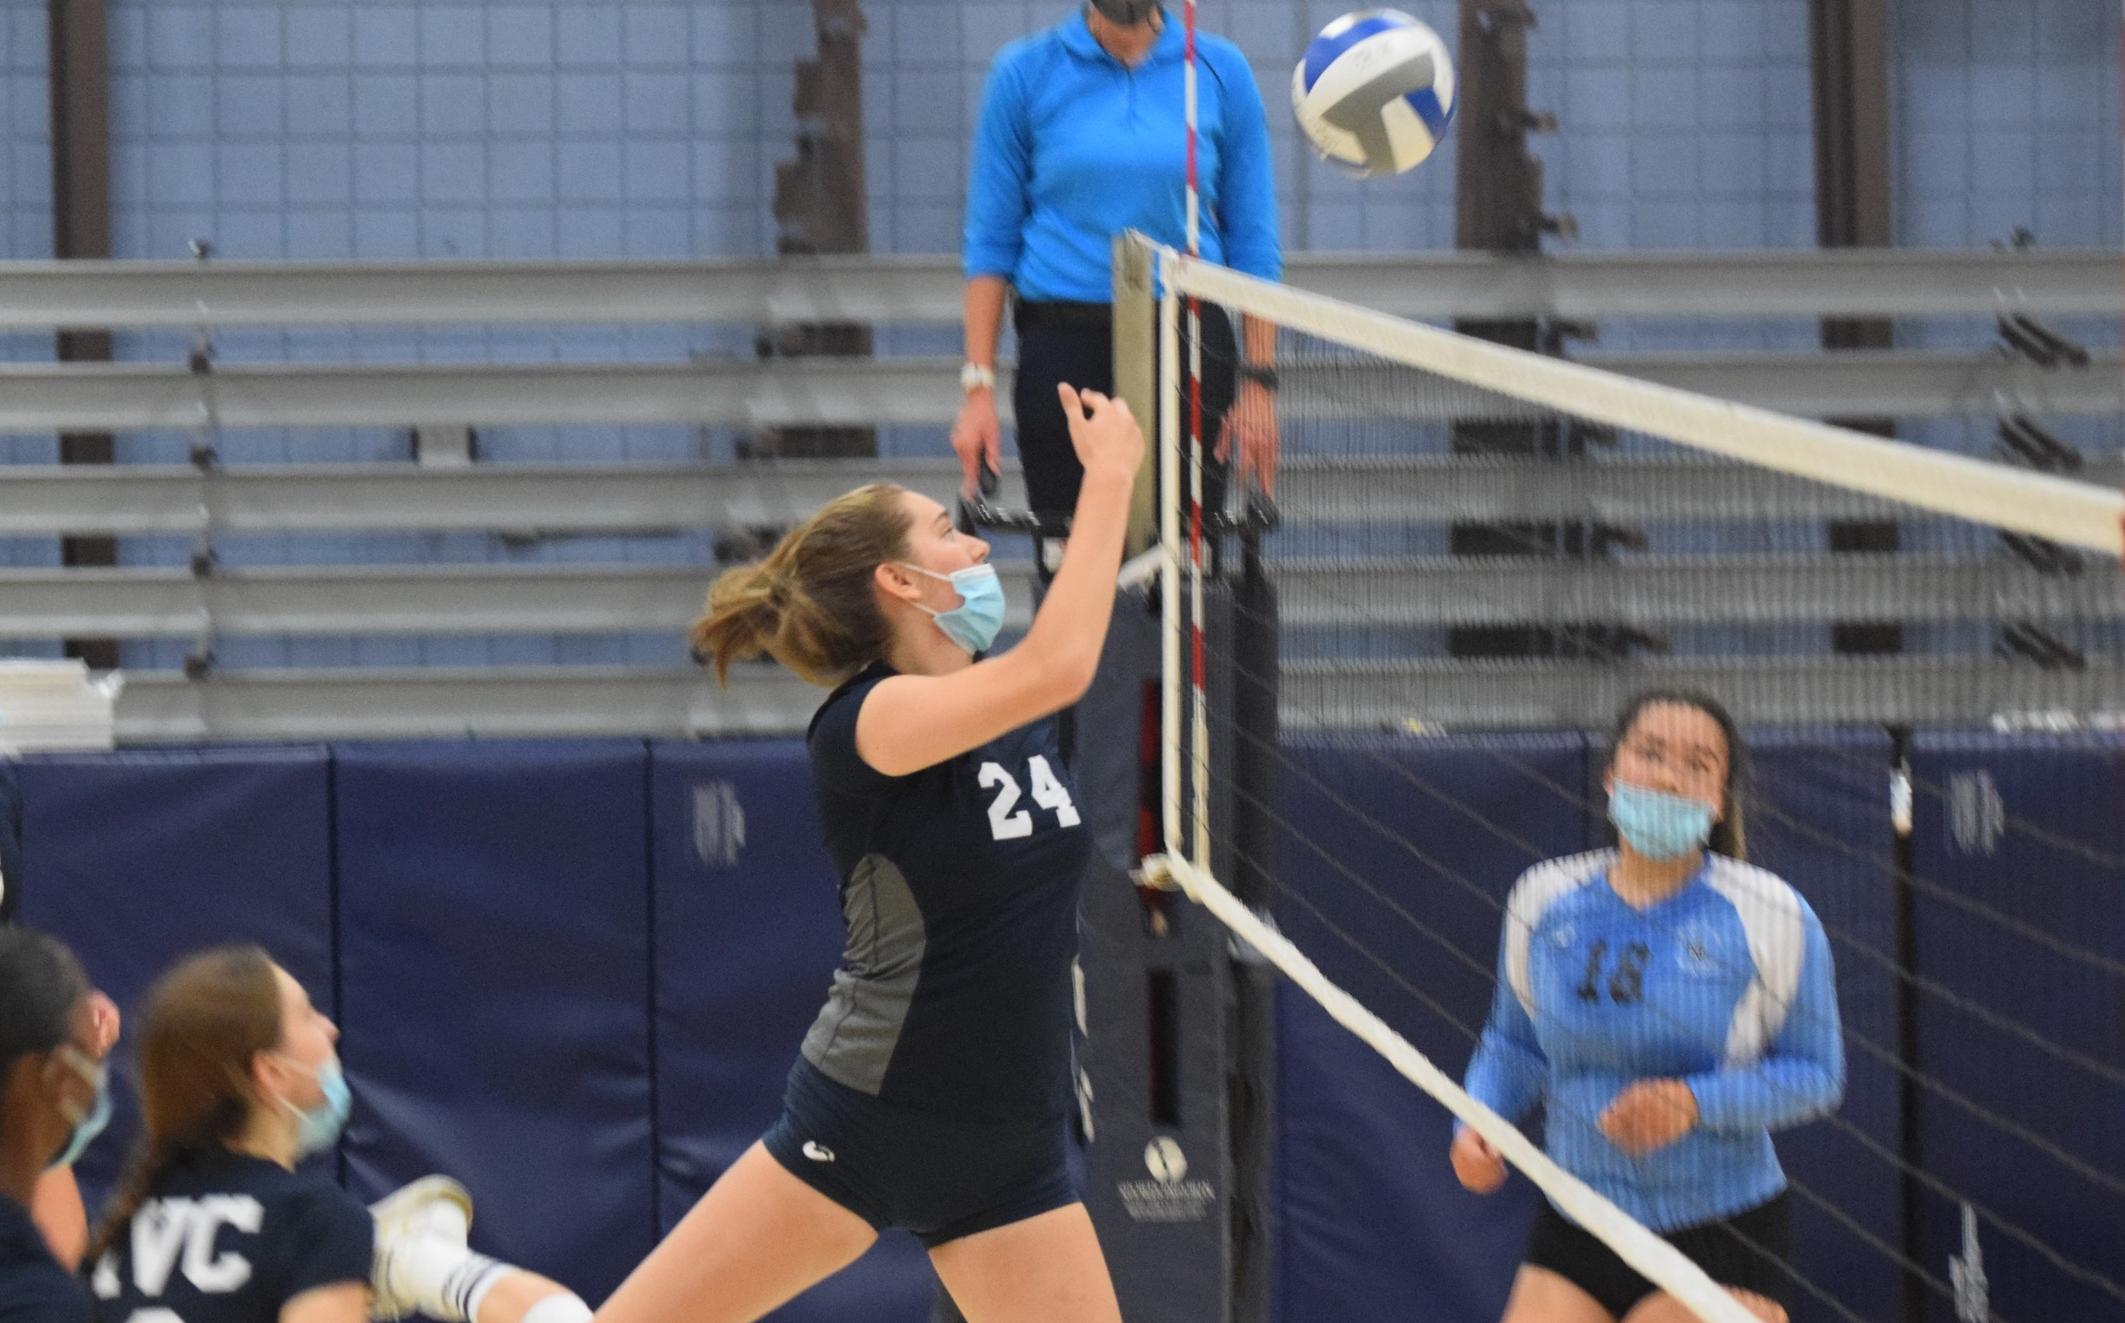 Women's volleyball team sweeps Miramar to move to 2-0